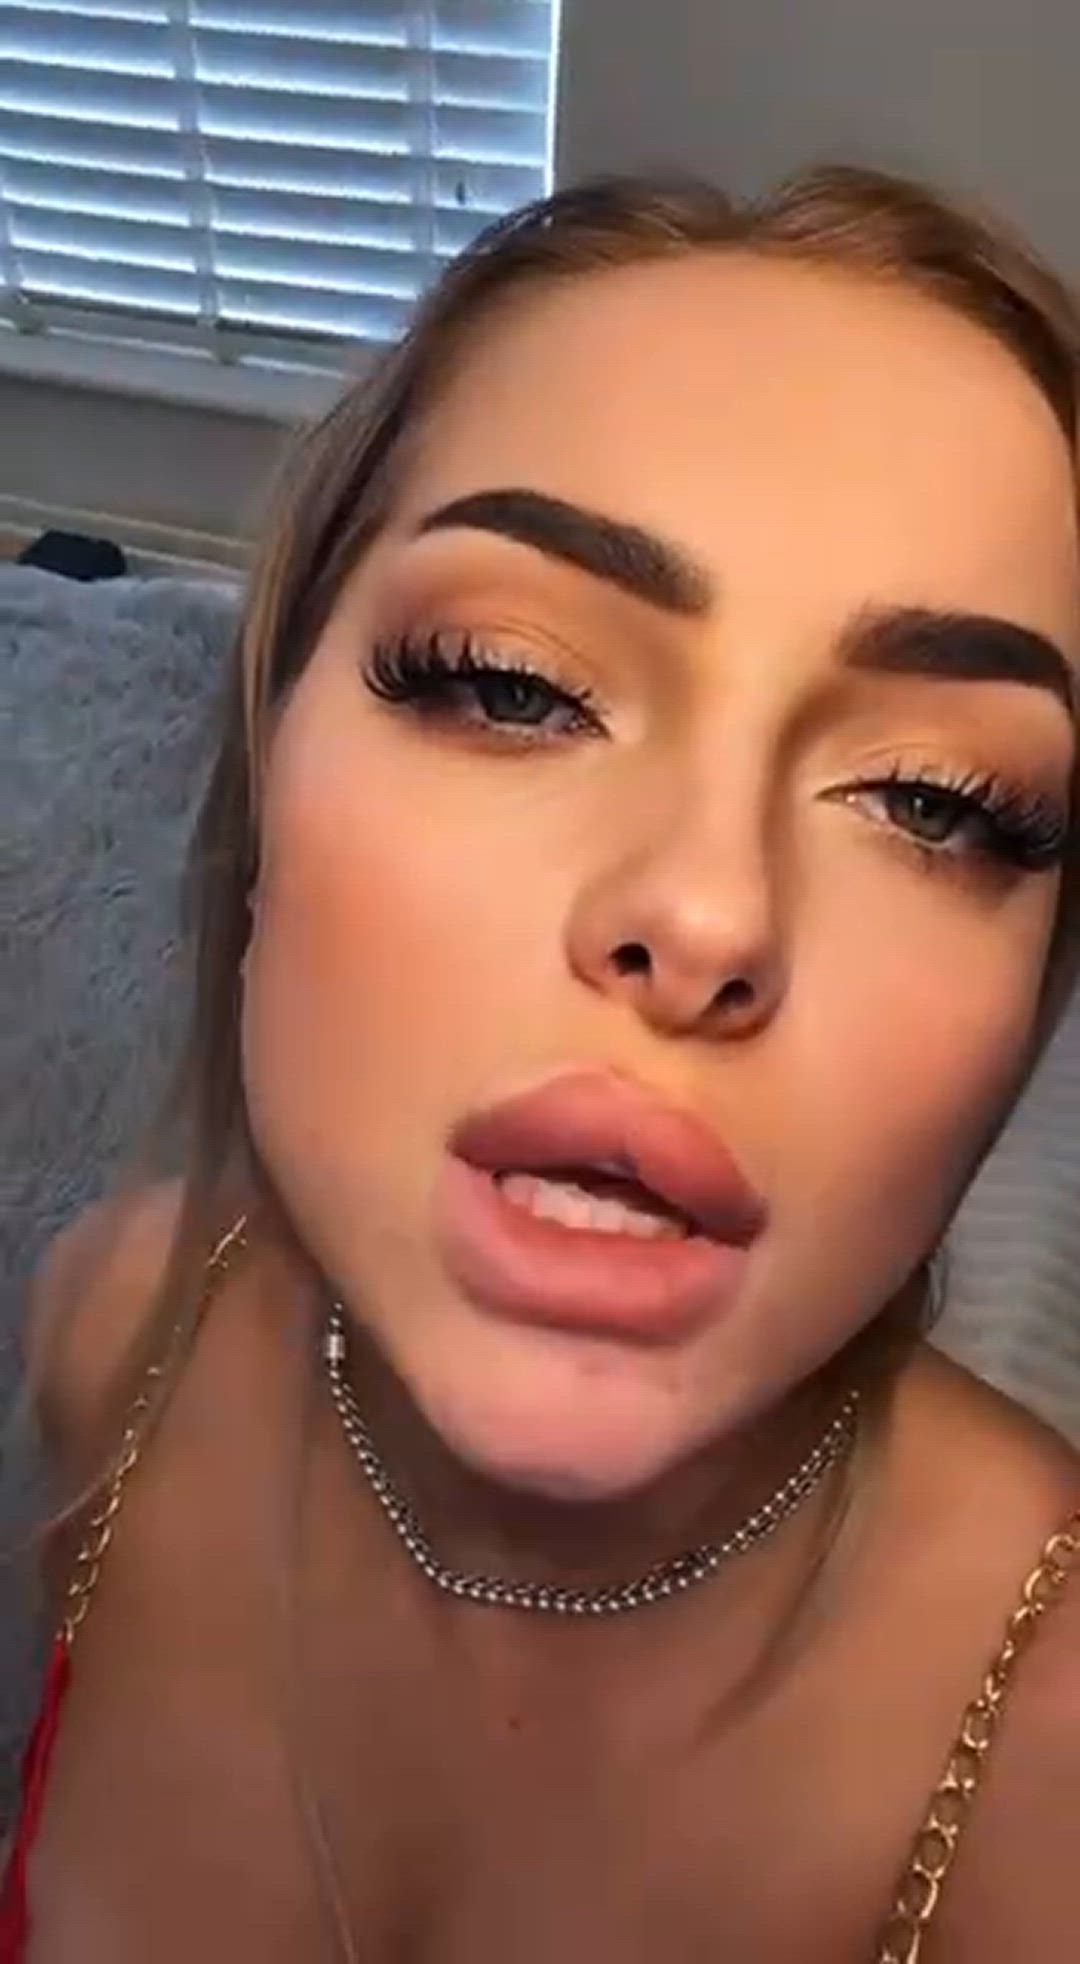 Big Tits porn video with onlyfans model cumslutfaye <strong>@xfayex23</strong>